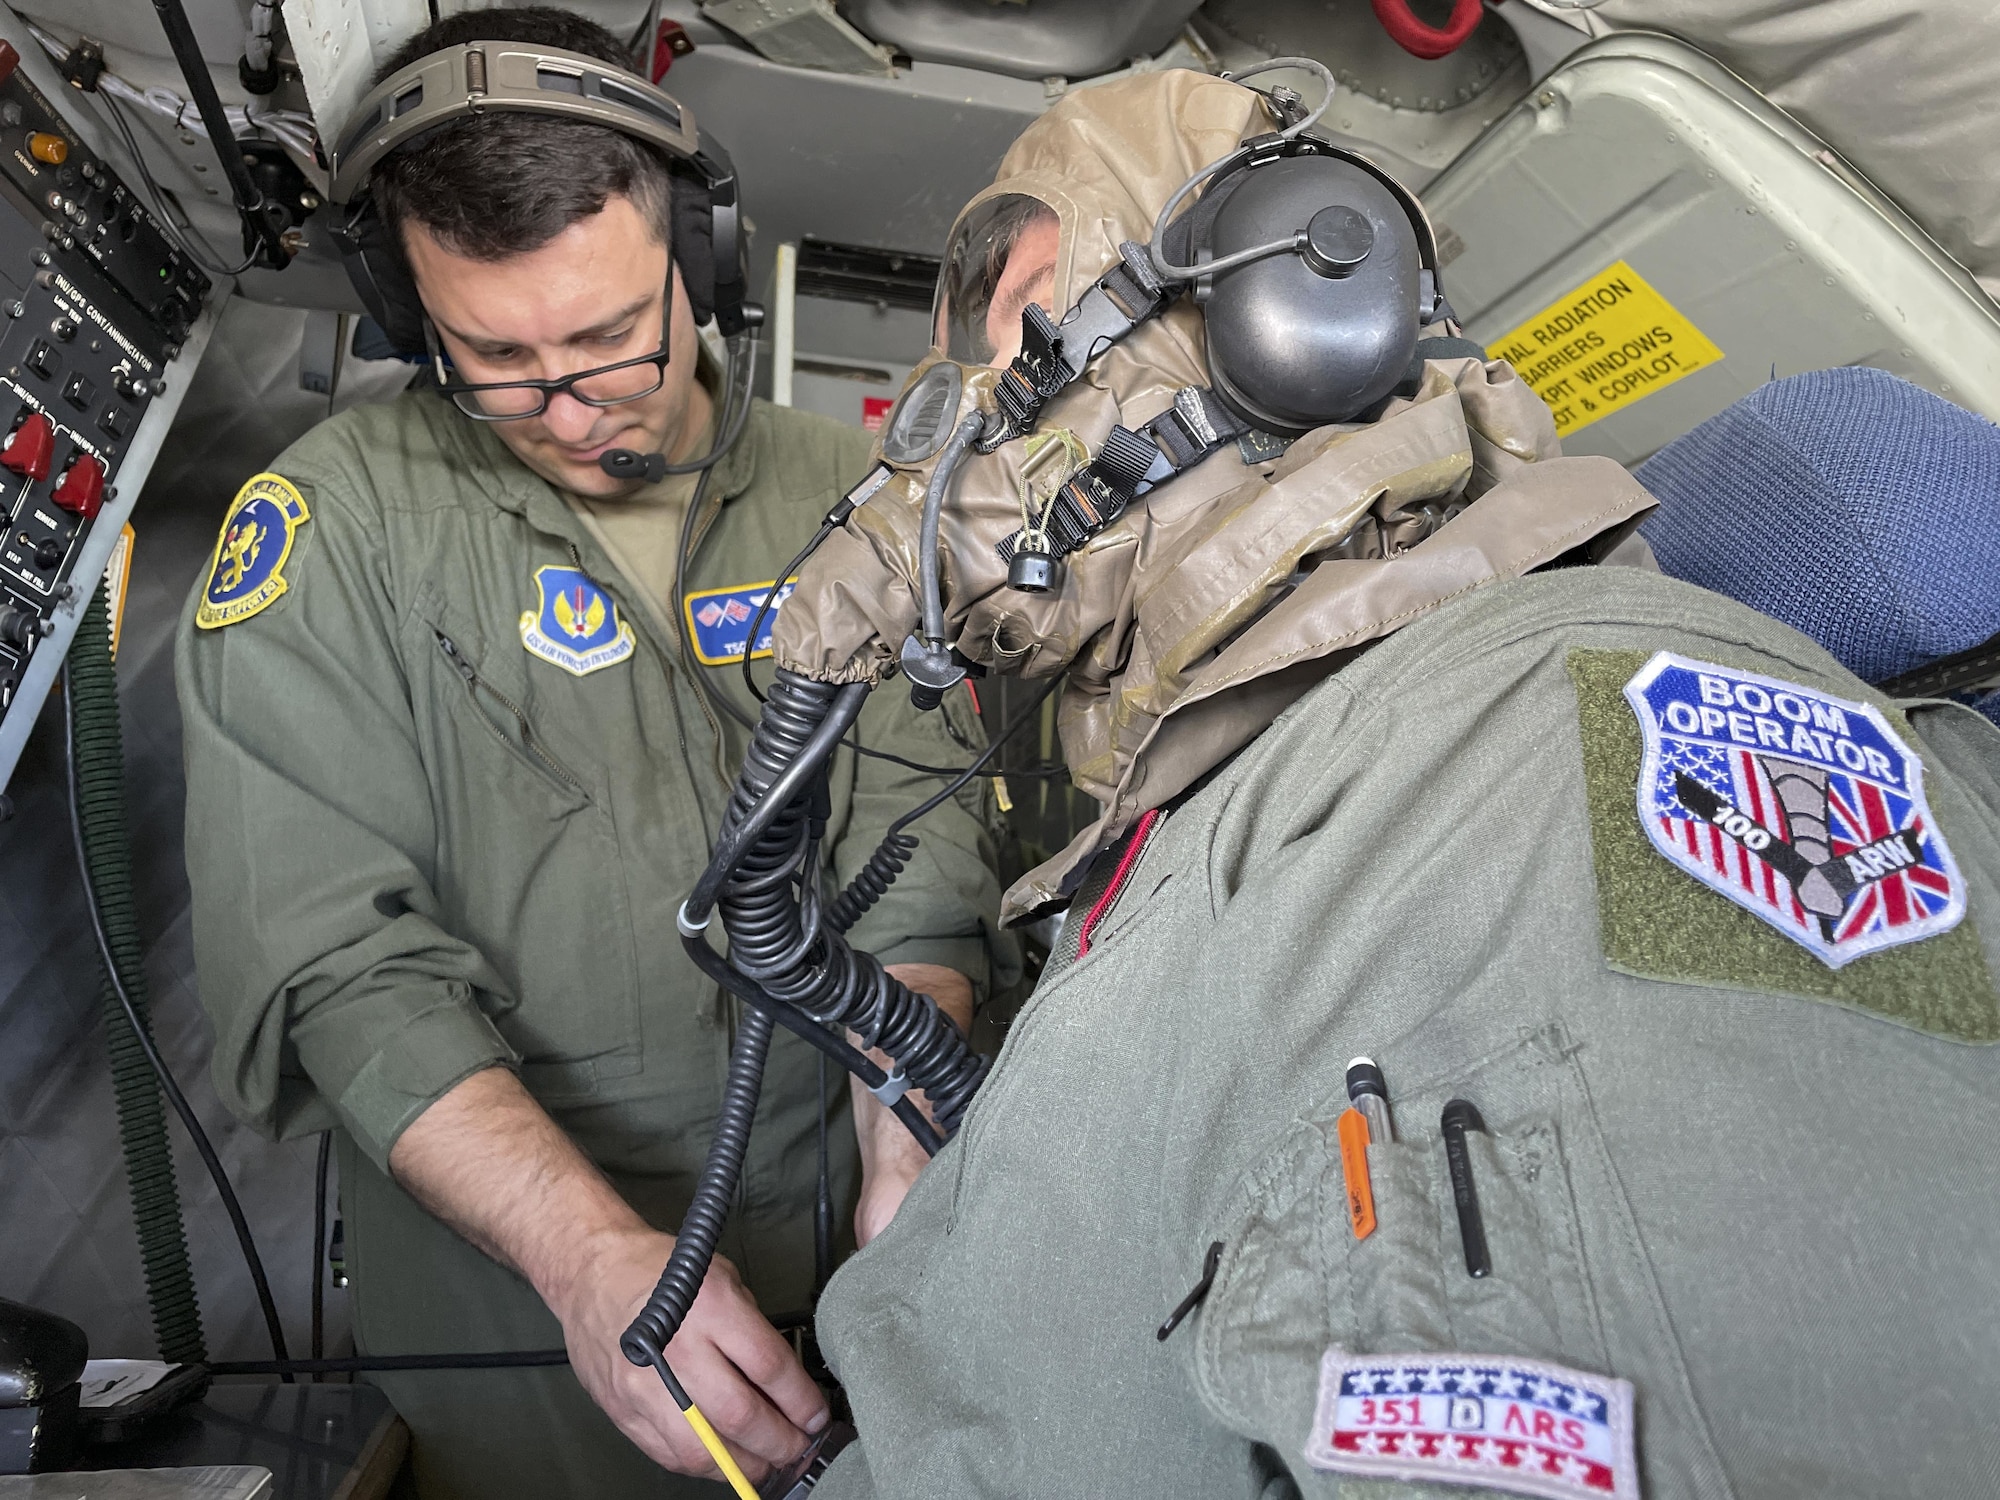 U.S. Air Force Tech. Sgt. Juan Upegui, 351st Air Refueling Squadron boom operator, left, assists Airman 1st Class Daniel Crump, 351st ARS boom operator, with donning his gas mask to meet a training requirement during a refueling mission over Europe Aug. 19, 2021. The 100th Air Refueling Wing is the only permanent U.S. air refueling wing in the European theater, providing the critical air refueling “bridge” which allows the expeditionary Air Force to deploy around the globe at a moment’s notice. (U.S. Air Force photo by Senior Airman Joseph Barron)